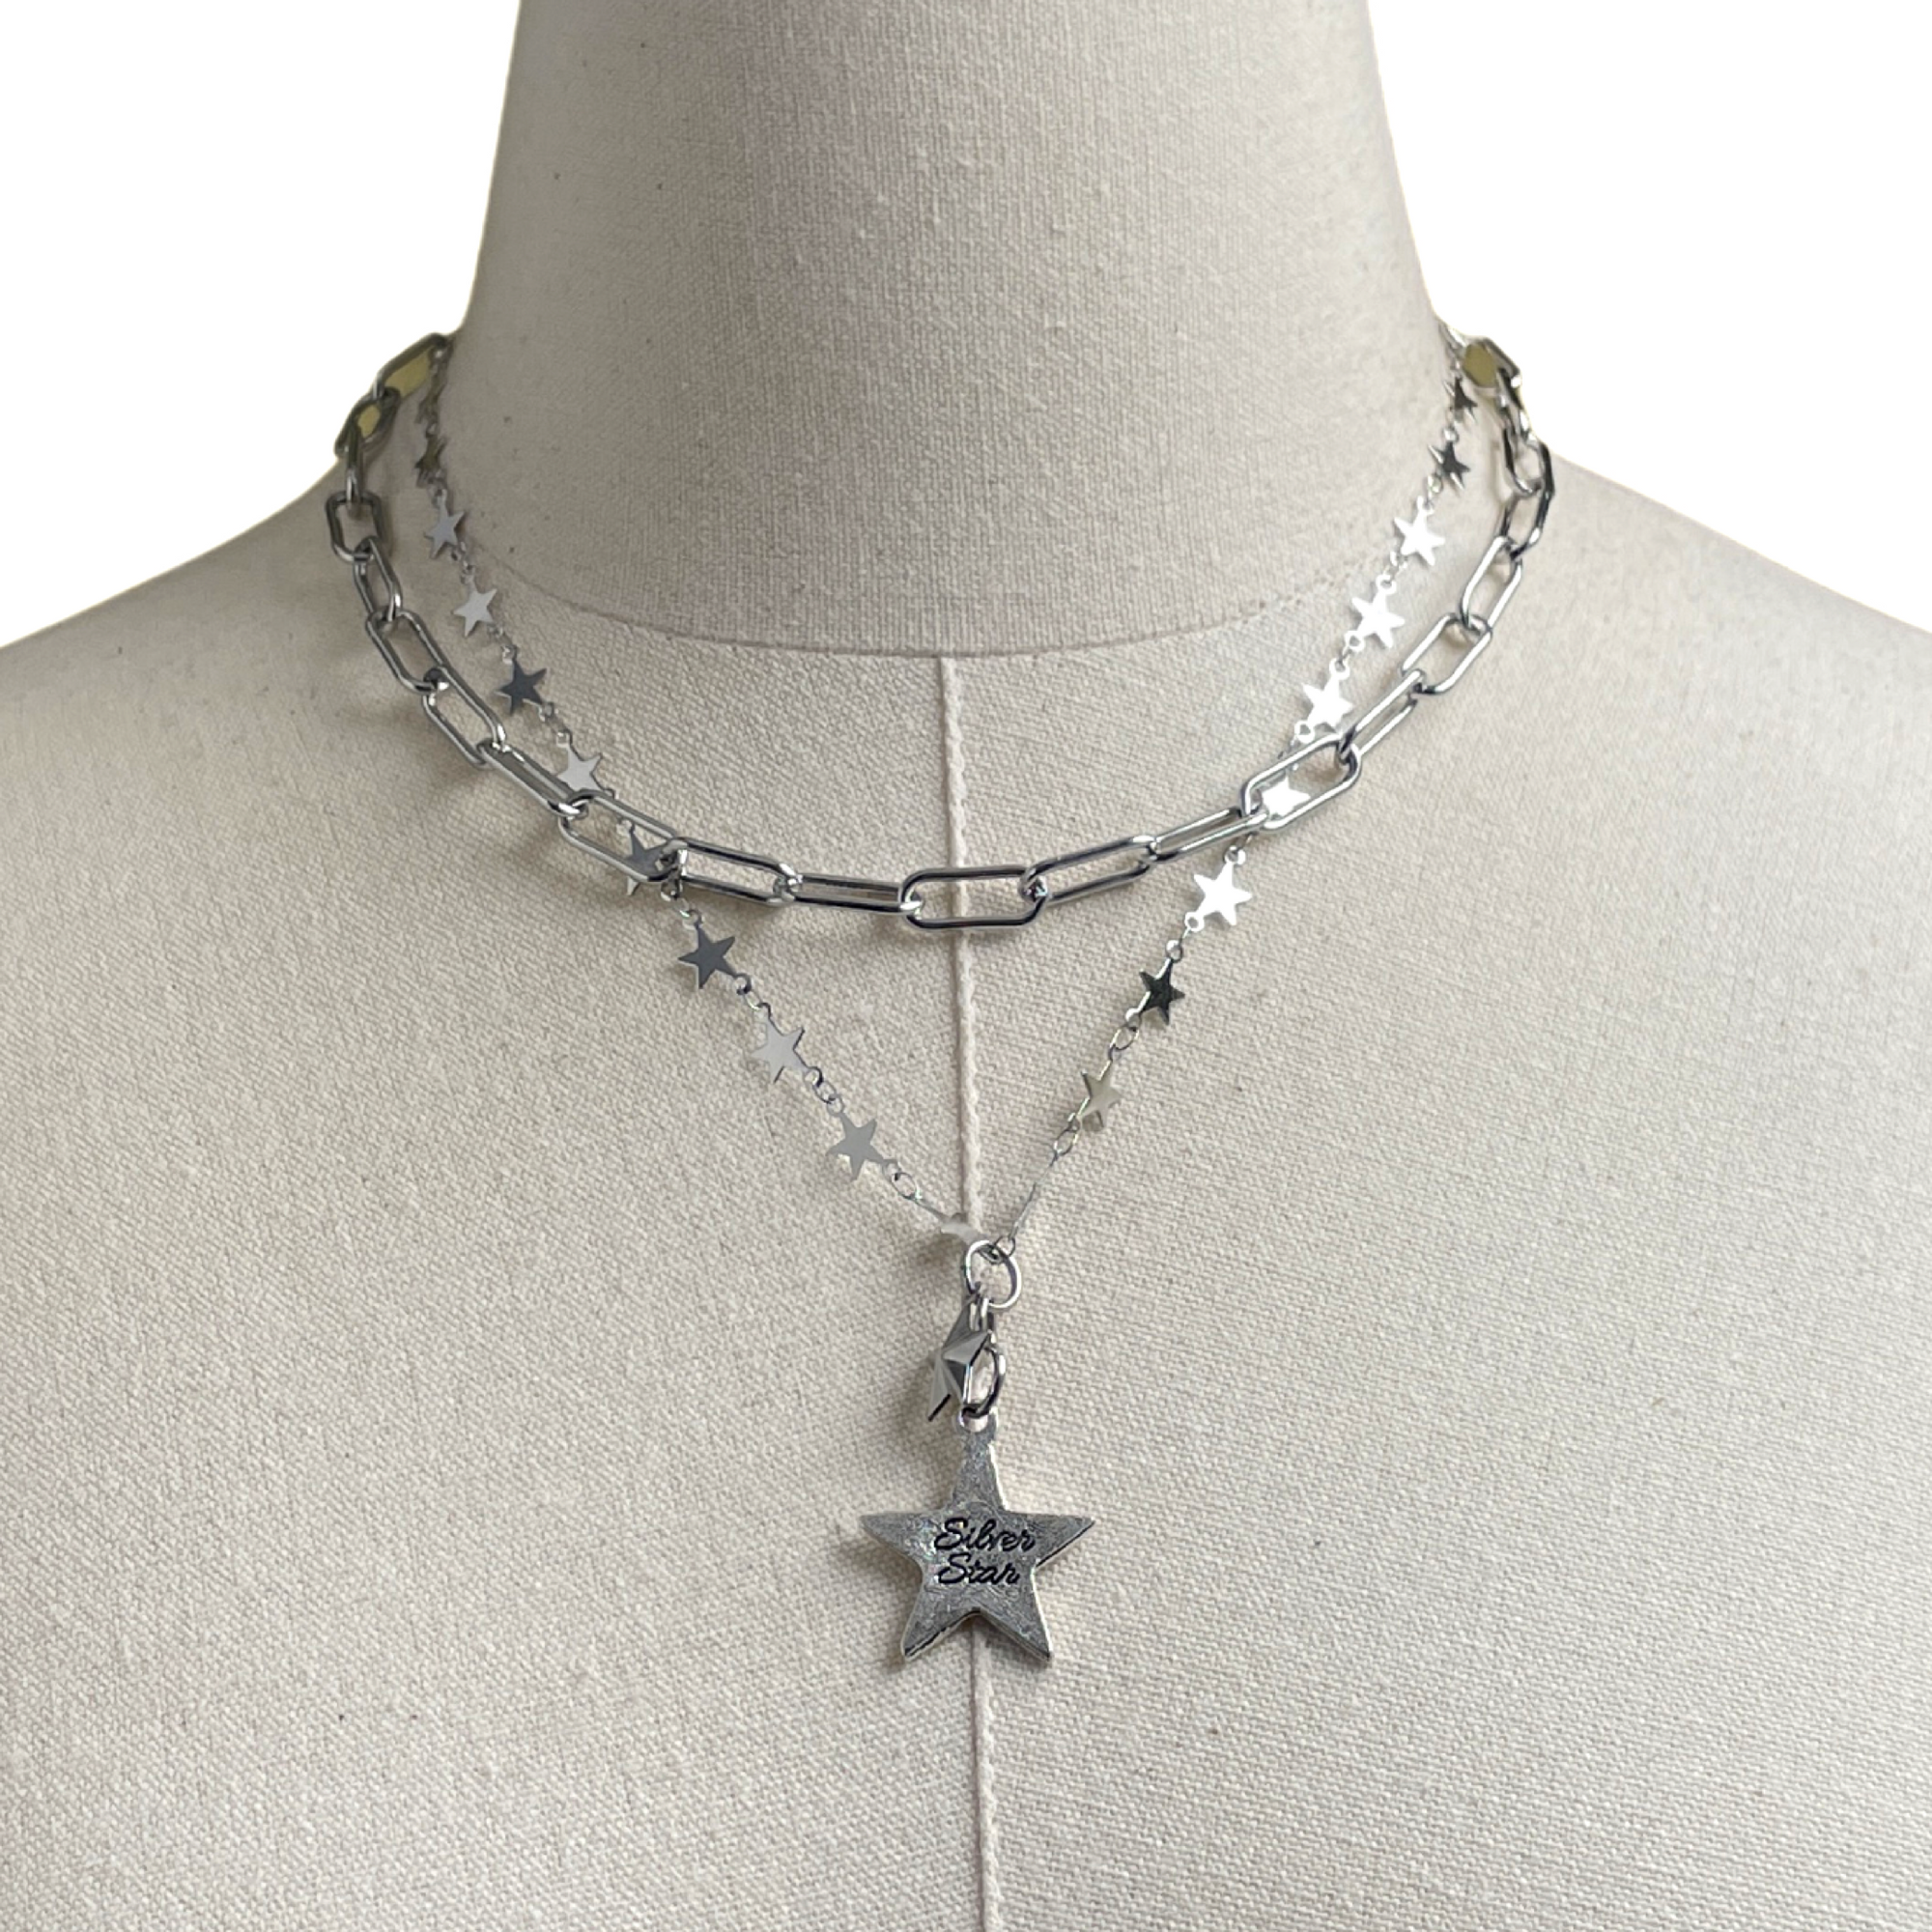 C15311 AKA Silver Star AKA Necklaces Cerese D, Inc.   